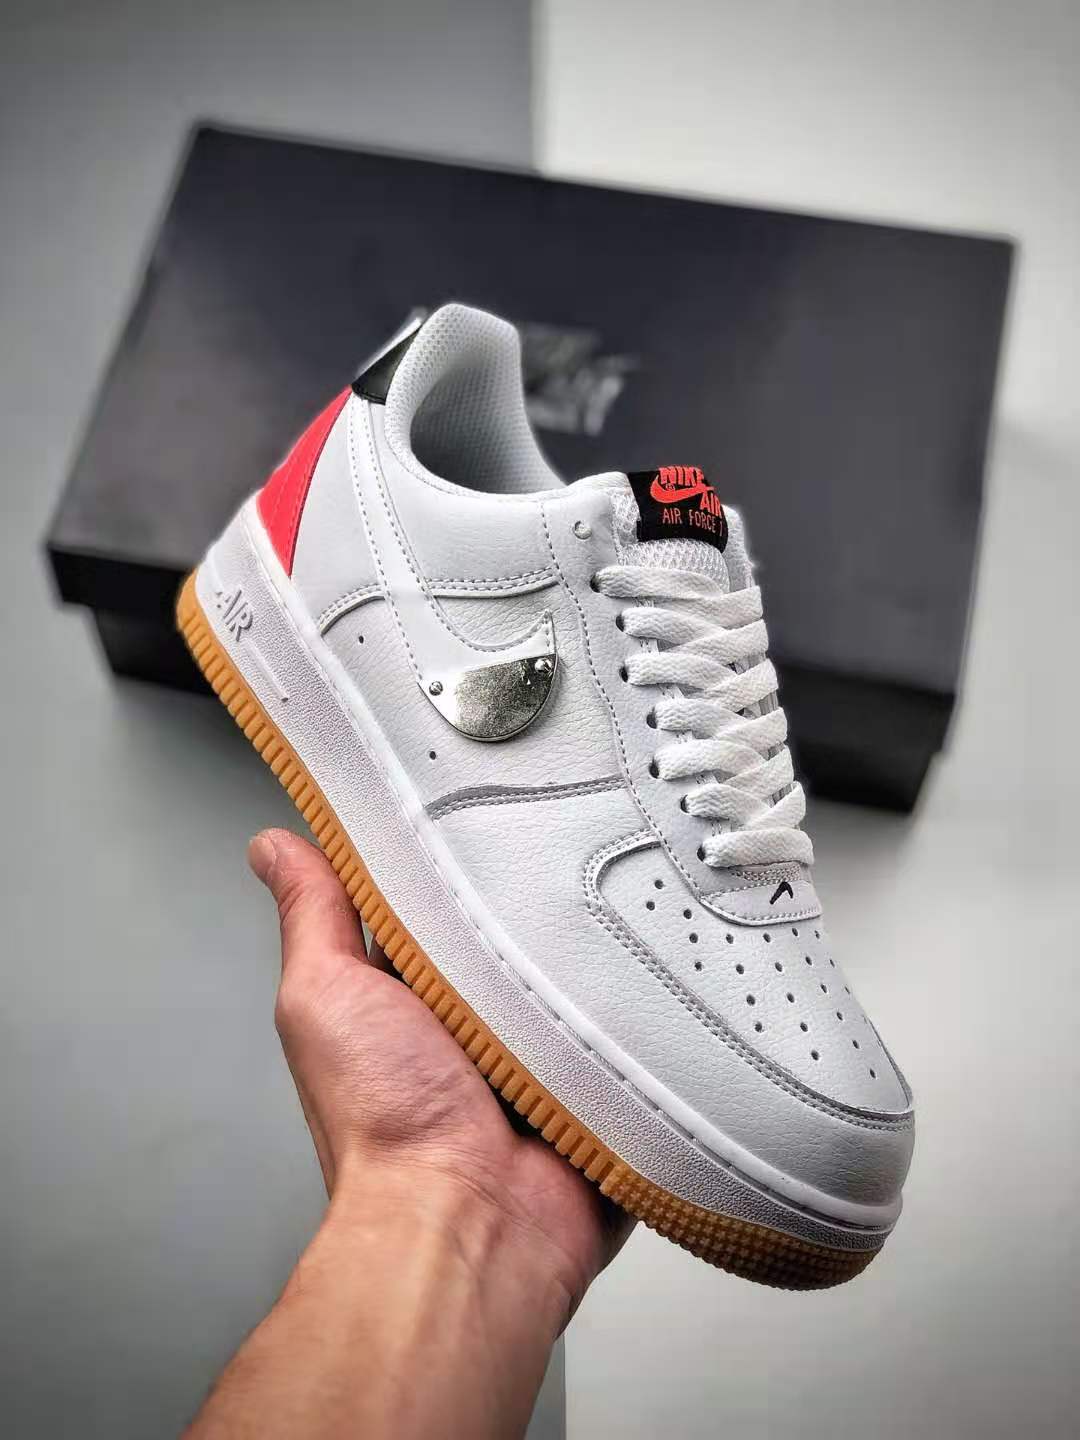 Nike NBA x Nike Air Force 1 '07 LV8 'White Bright Crimson' CT2298-101 - Premium NBA Collaboration with Striking White and Red Colors